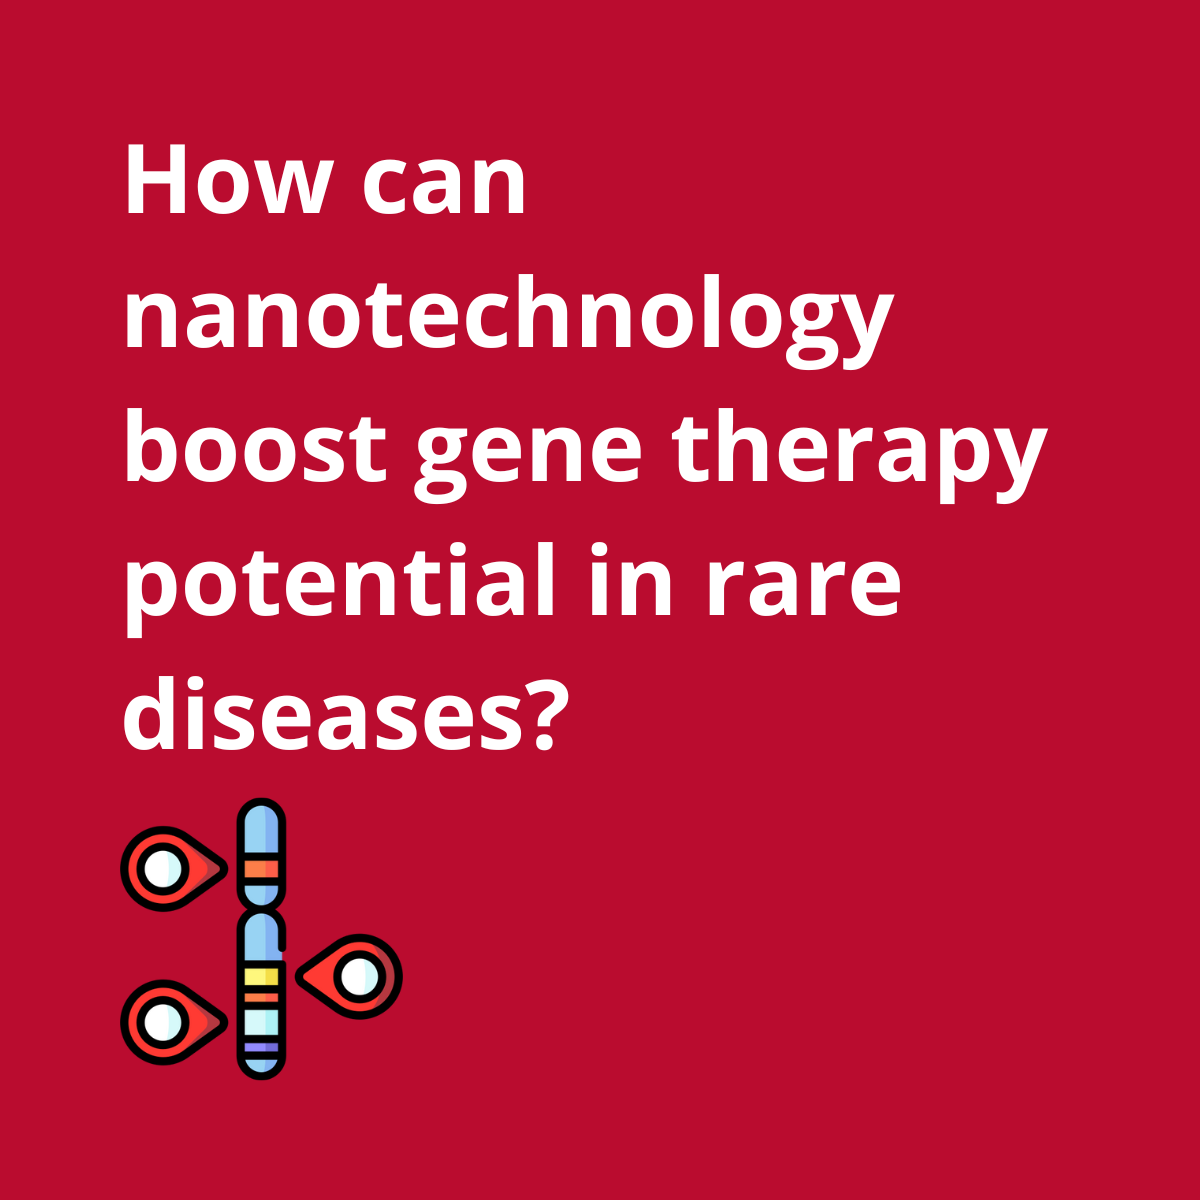 Nanotechnology is crucial in providing effective therapies to treat rare diseases.